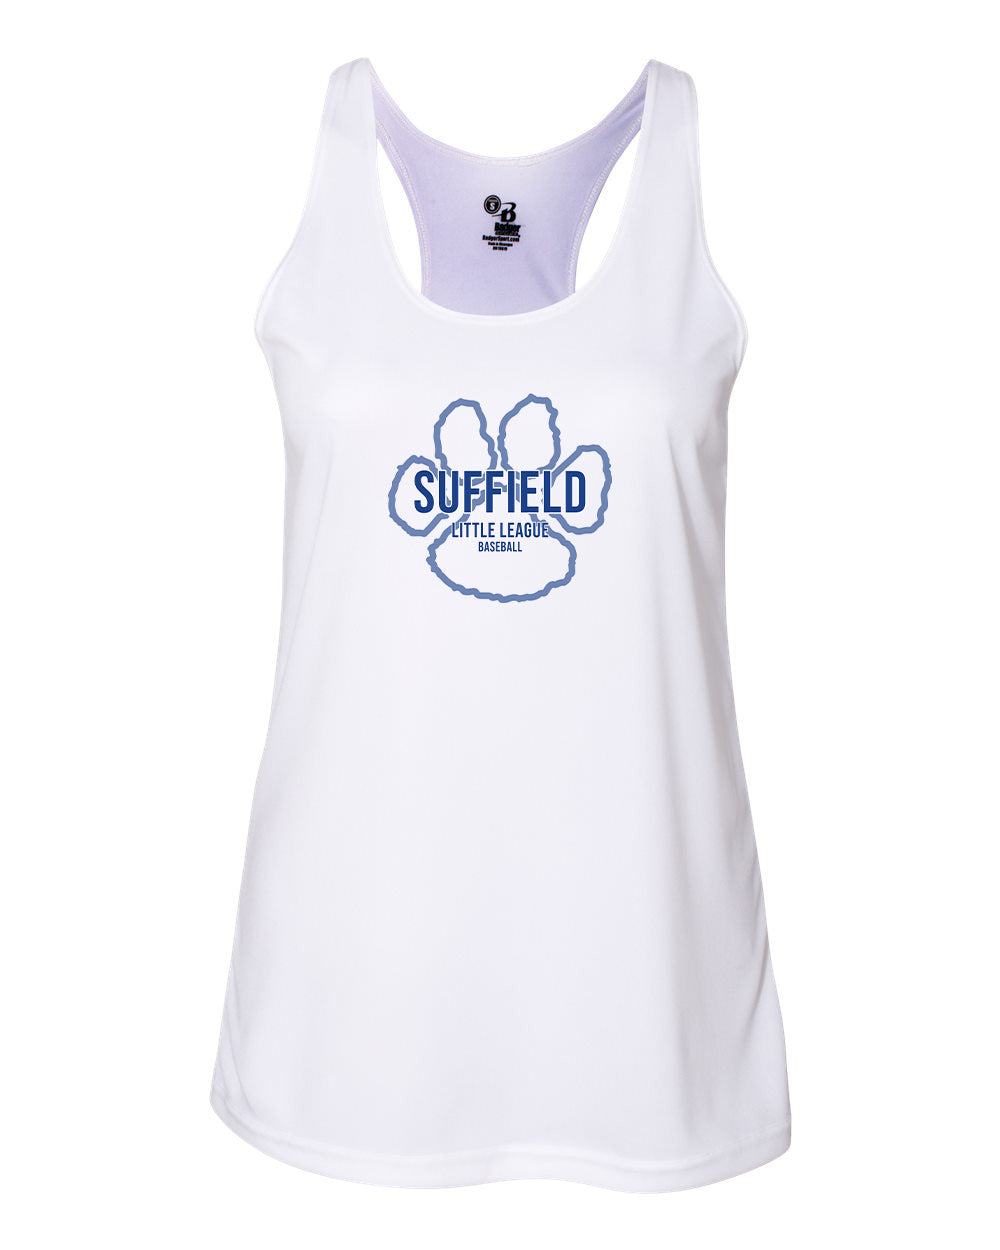 Suffield LL Ladies Badger Racerback Tank "Big Paw Baseball" - 4166 (color options available)